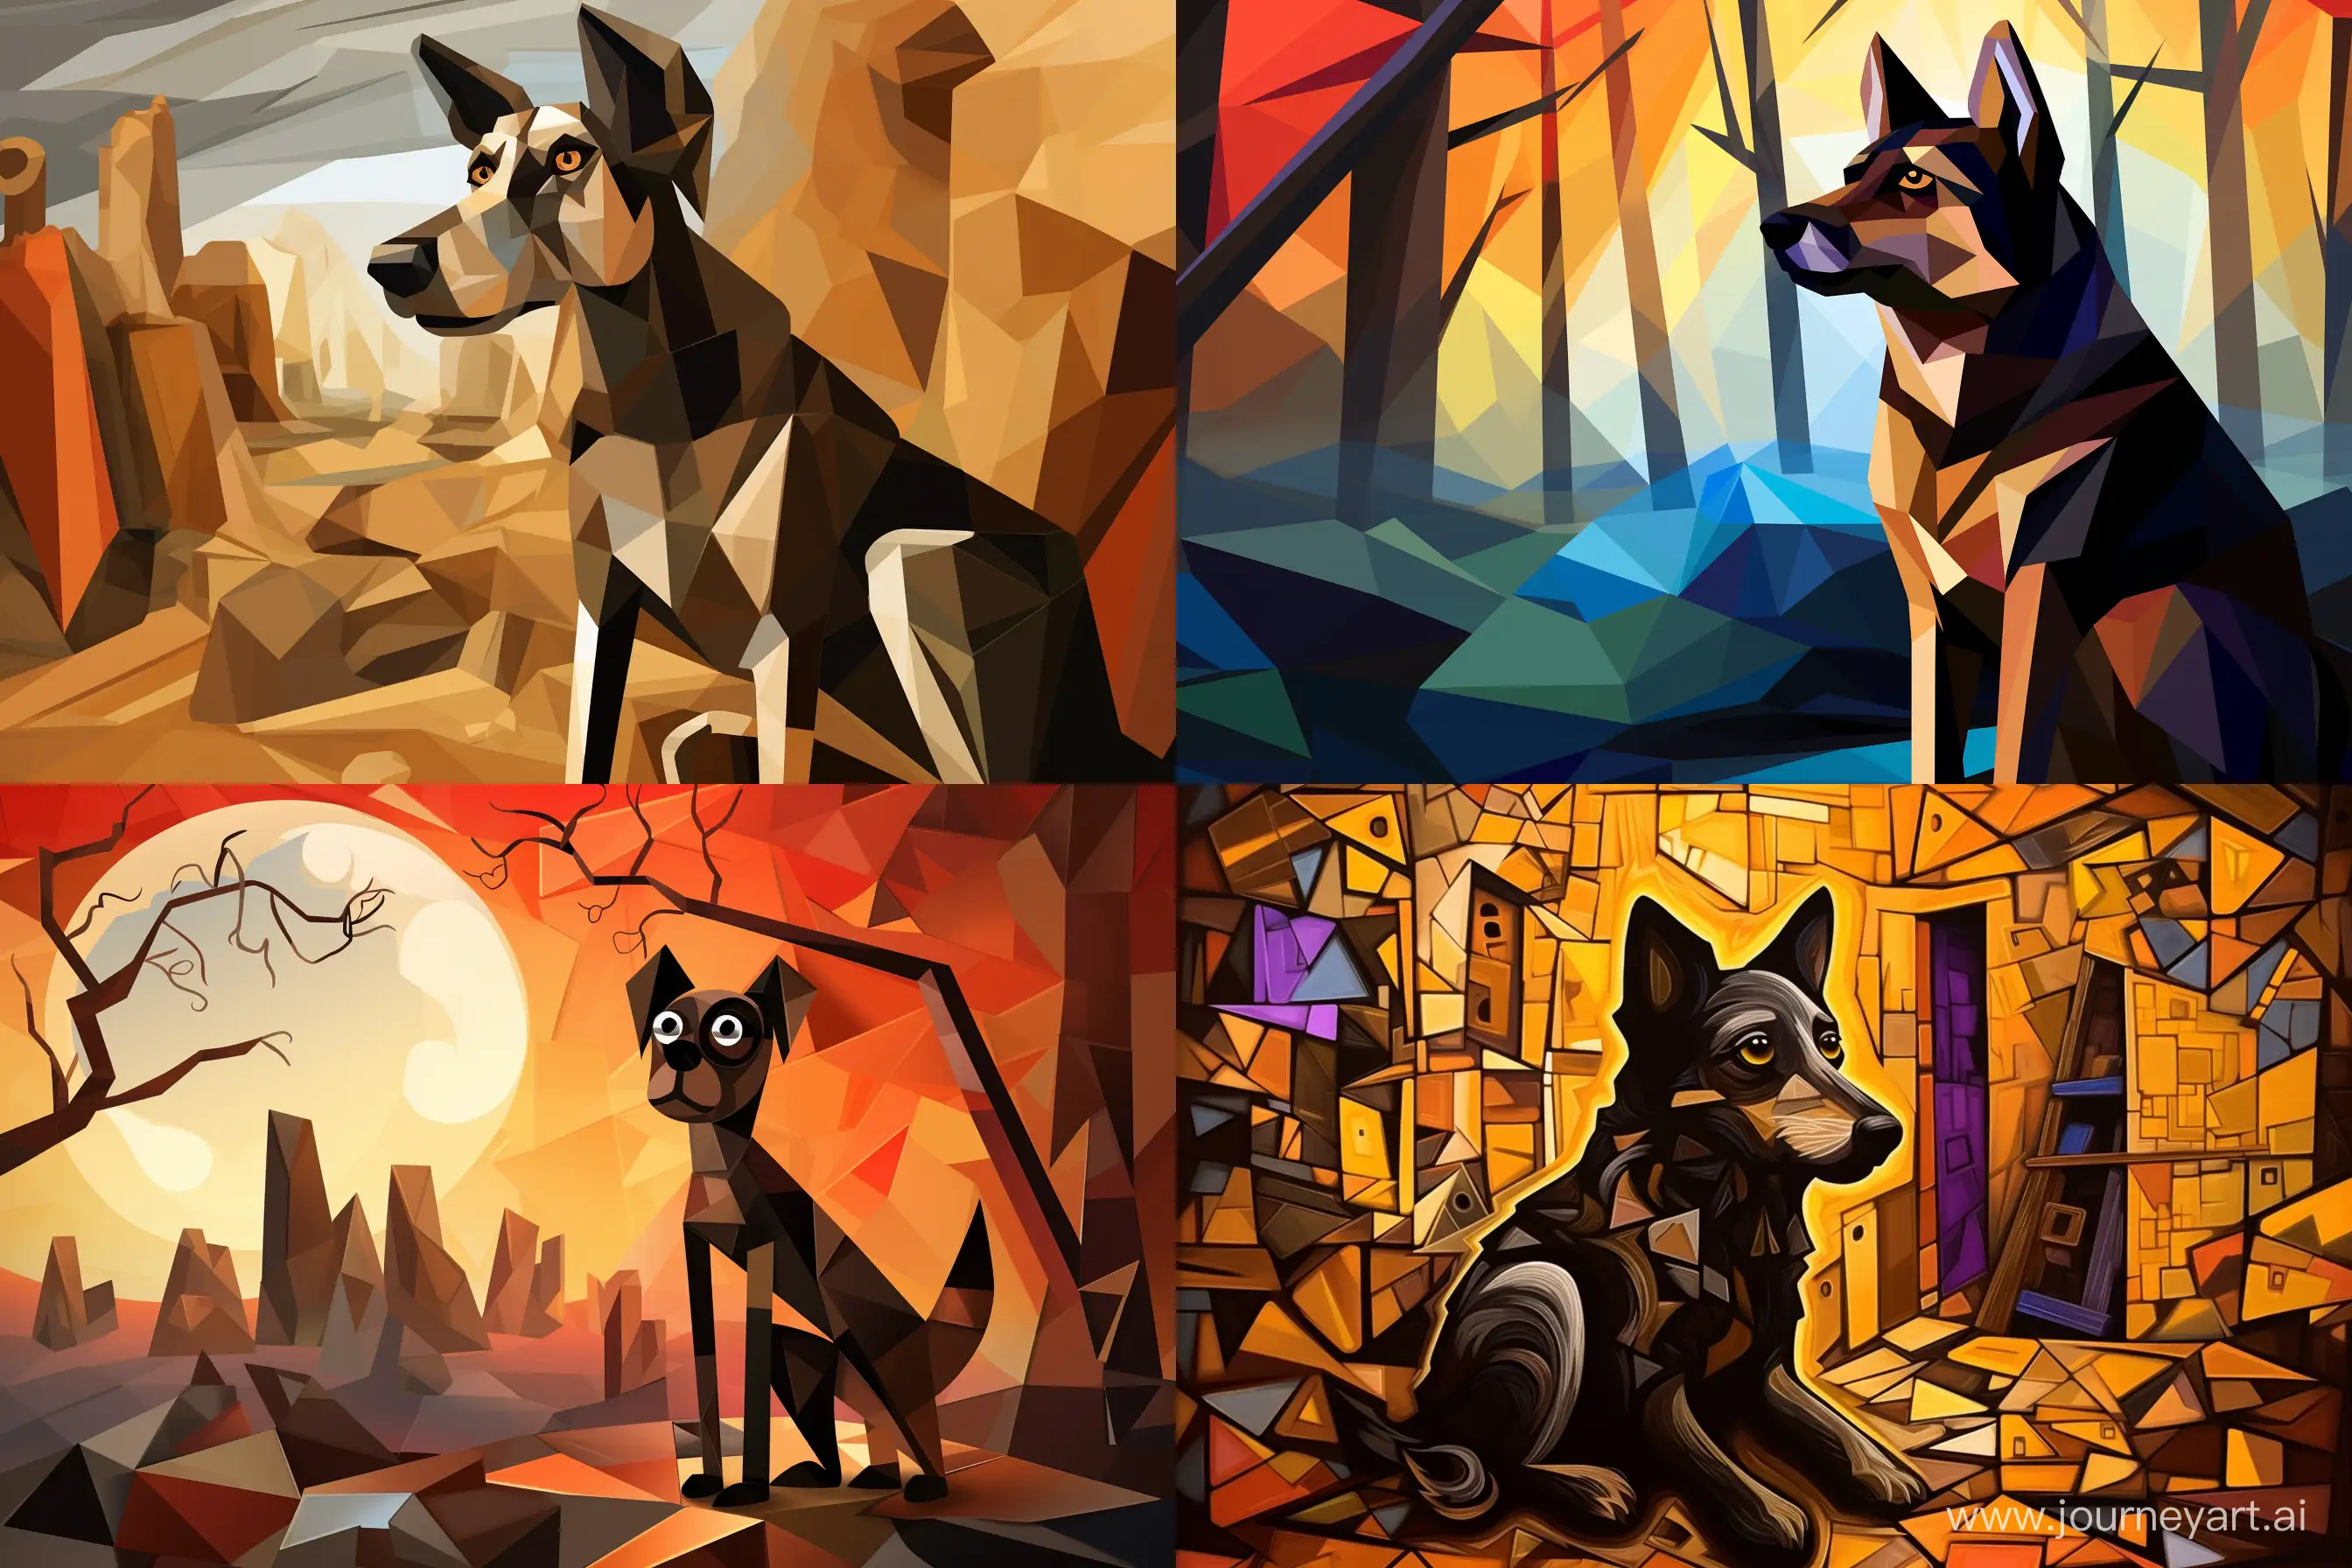 Cubist Explorer
A carachter dog depicted in the fragmented style of cubism, exploring a surreal environment. --ar 3:2